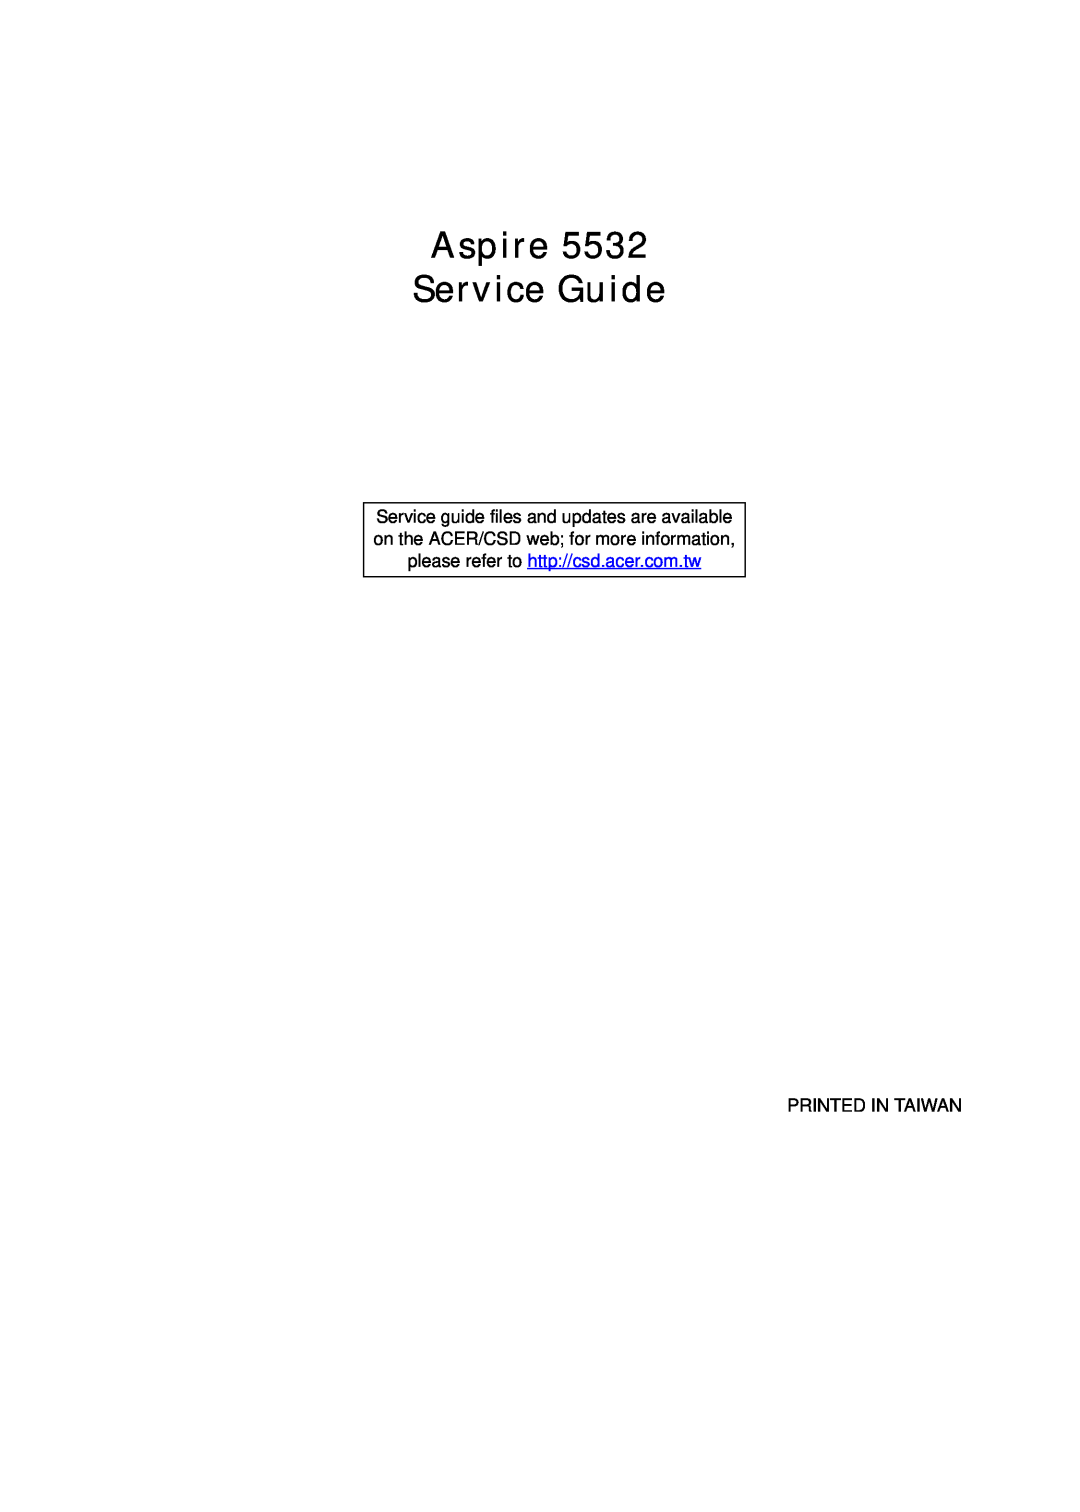 Acer 5532 manual Aspire Service Guide, Printed In Taiwan 